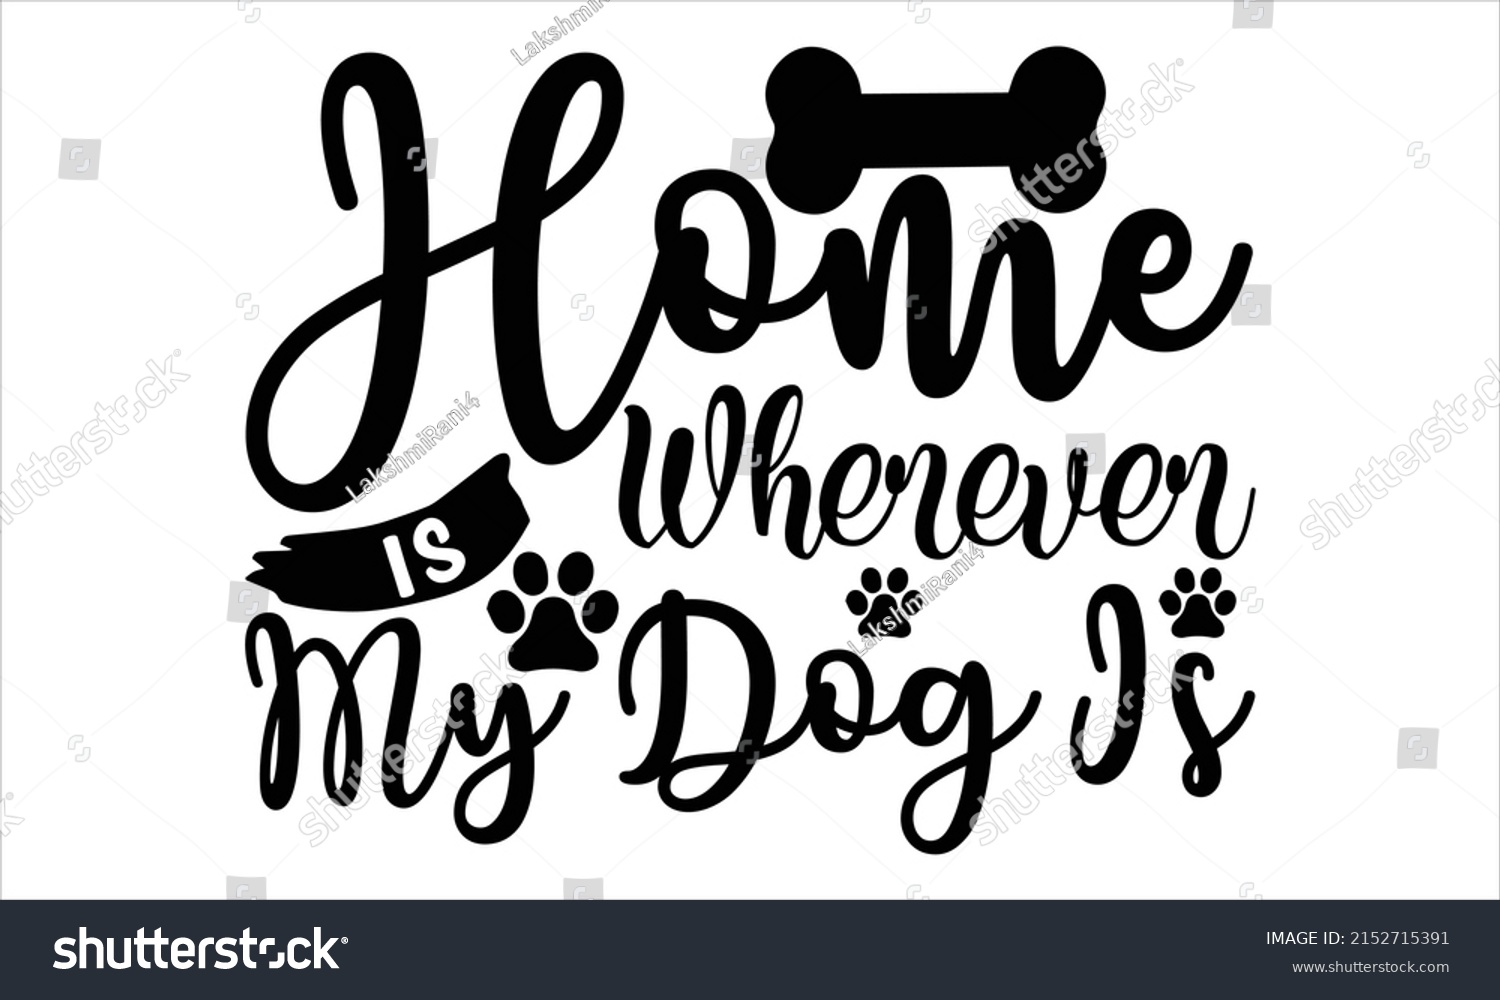 SVG of Home is wherever my dog is  -   Lettering design for greeting banners, Mouse Pads, Prints, Cards and Posters, Mugs, Notebooks, Floor Pillows and T-shirt prints design.
 svg